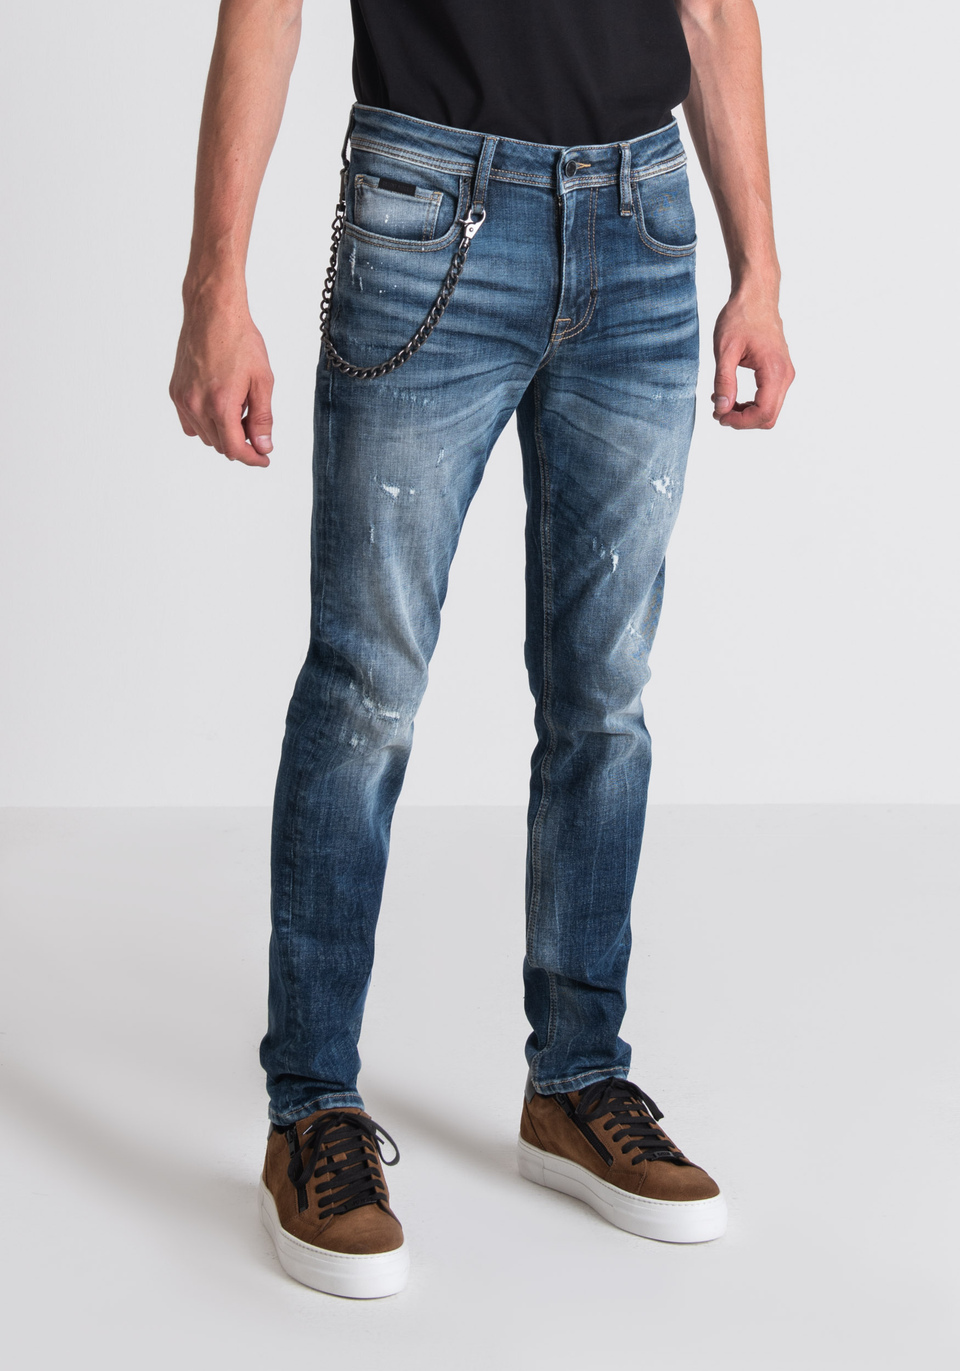 JEANS “IGGY” TAPERED FIT IN DENIM STRETCH - Antony Morato Online Shop